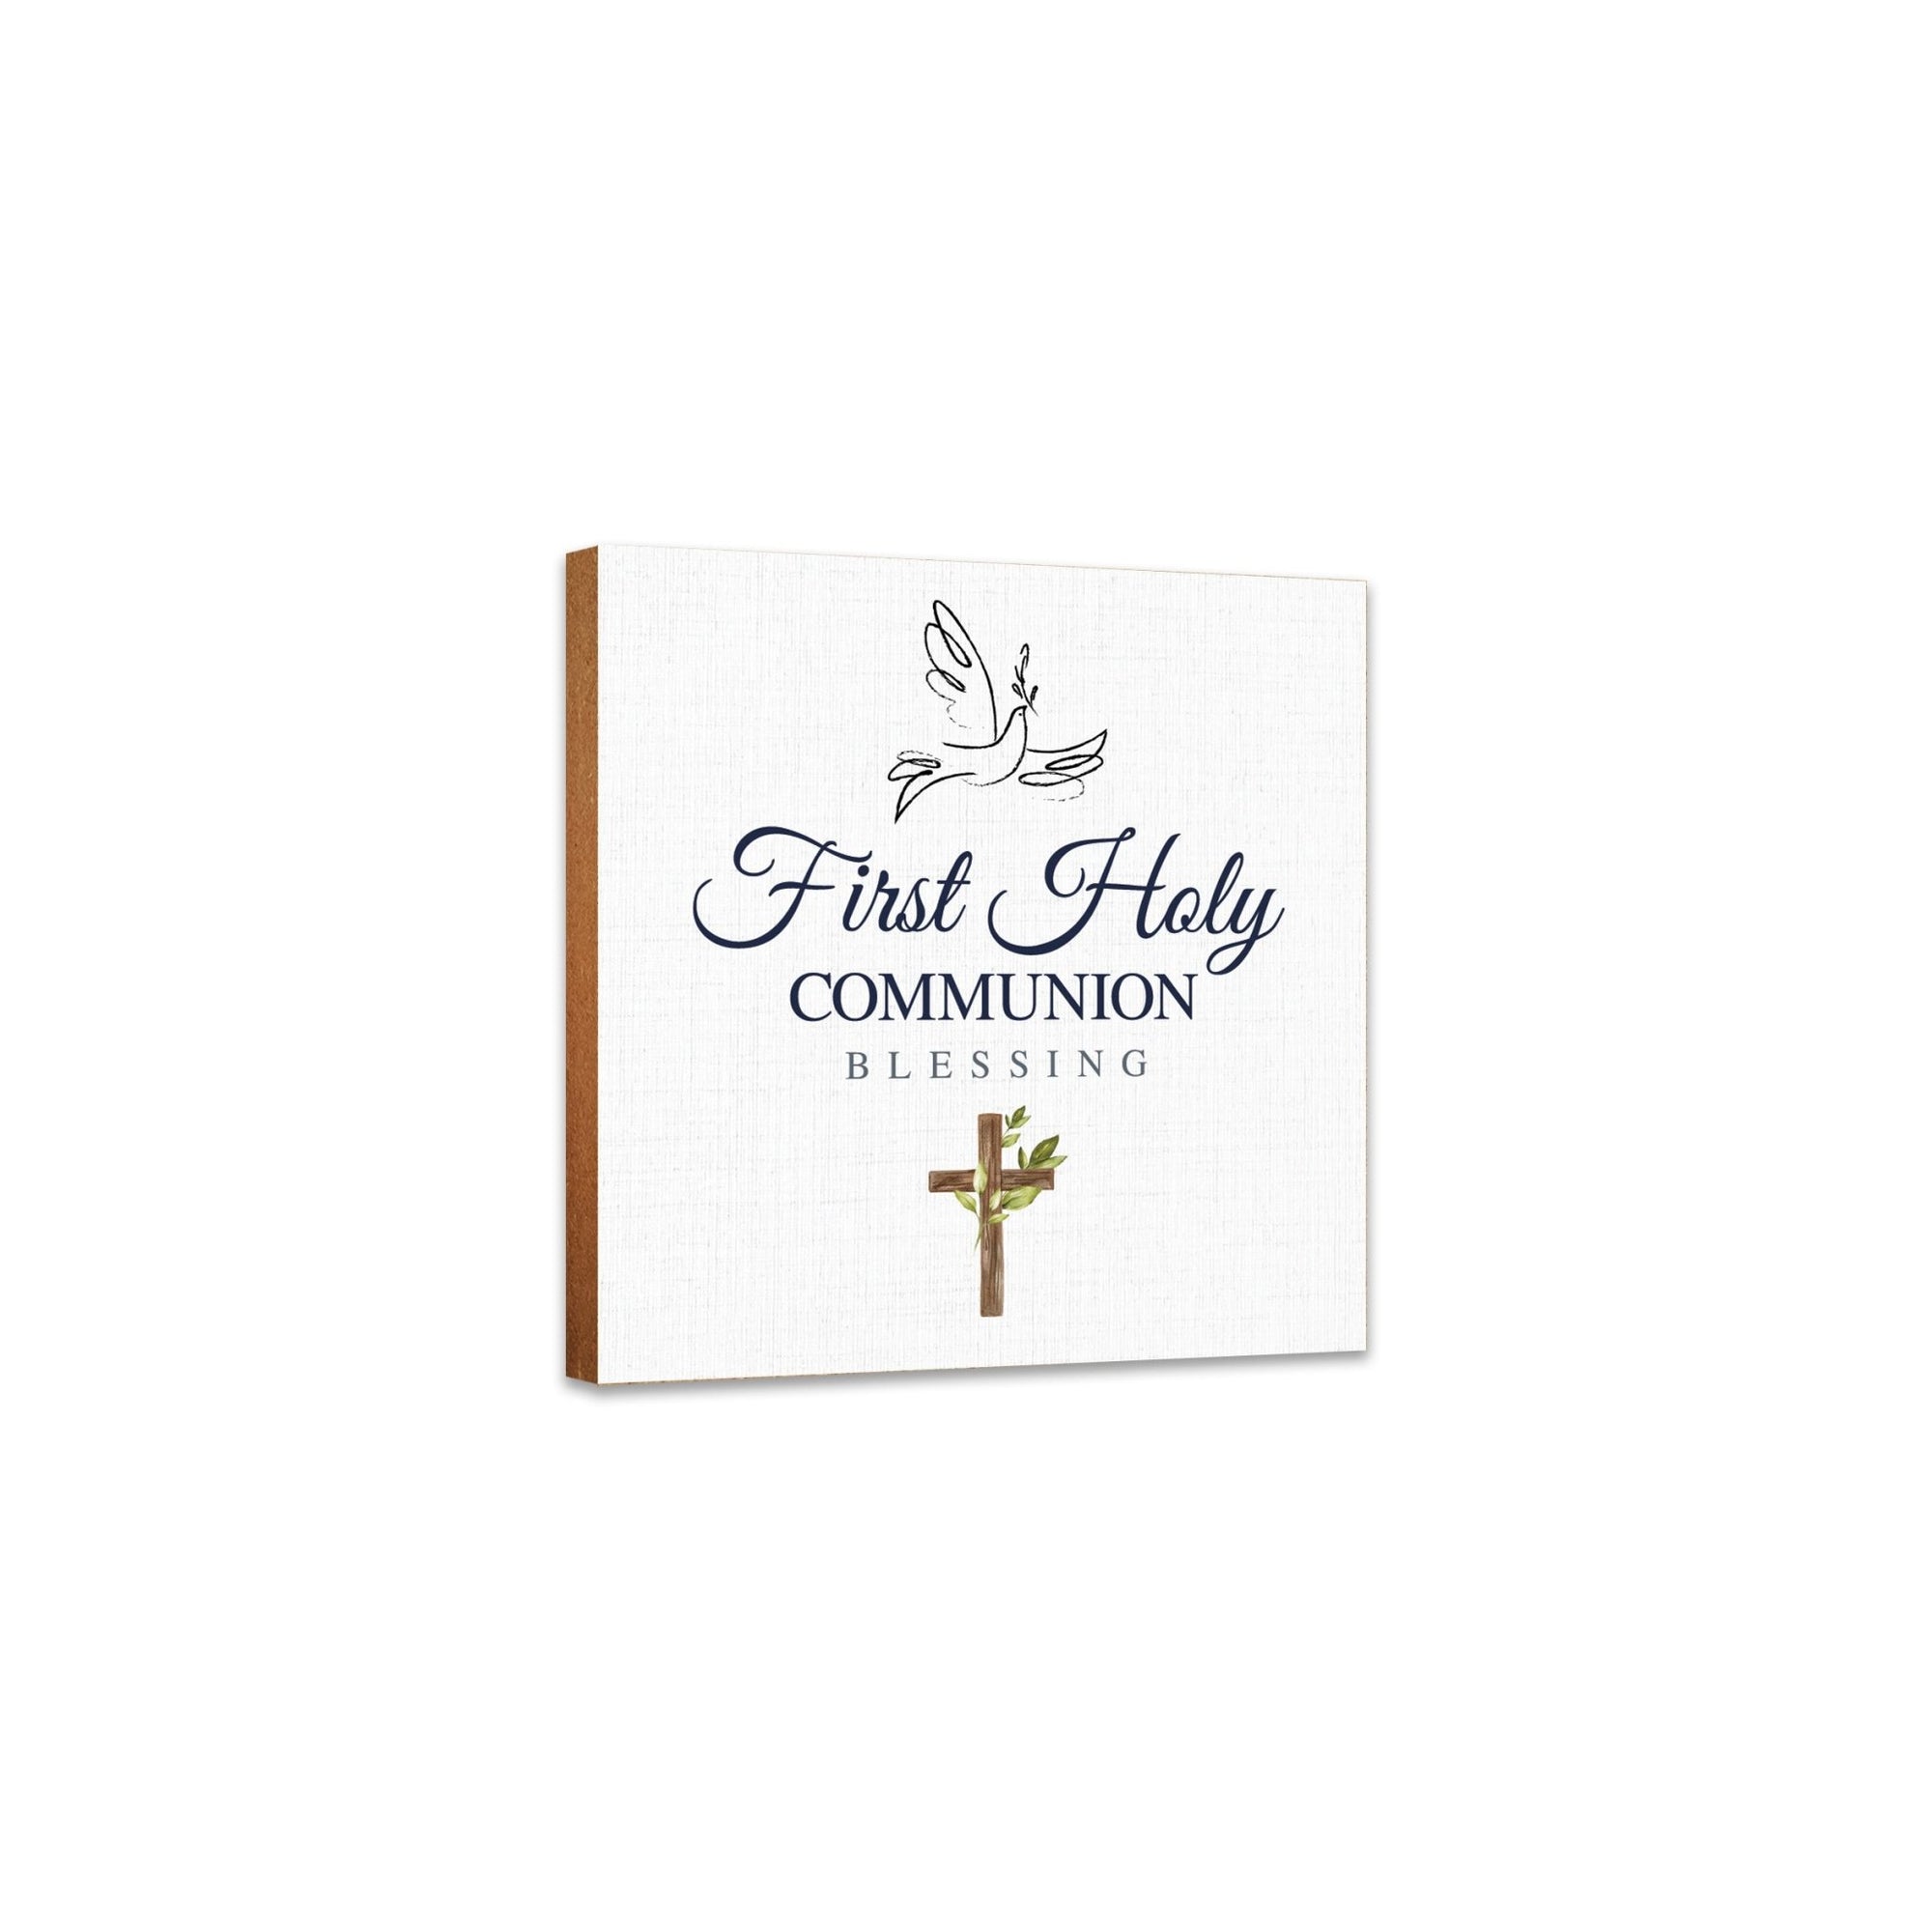 Inspirational Shelf Décor and Tabletop Signs for First Holy Communion - LifeSong Milestones